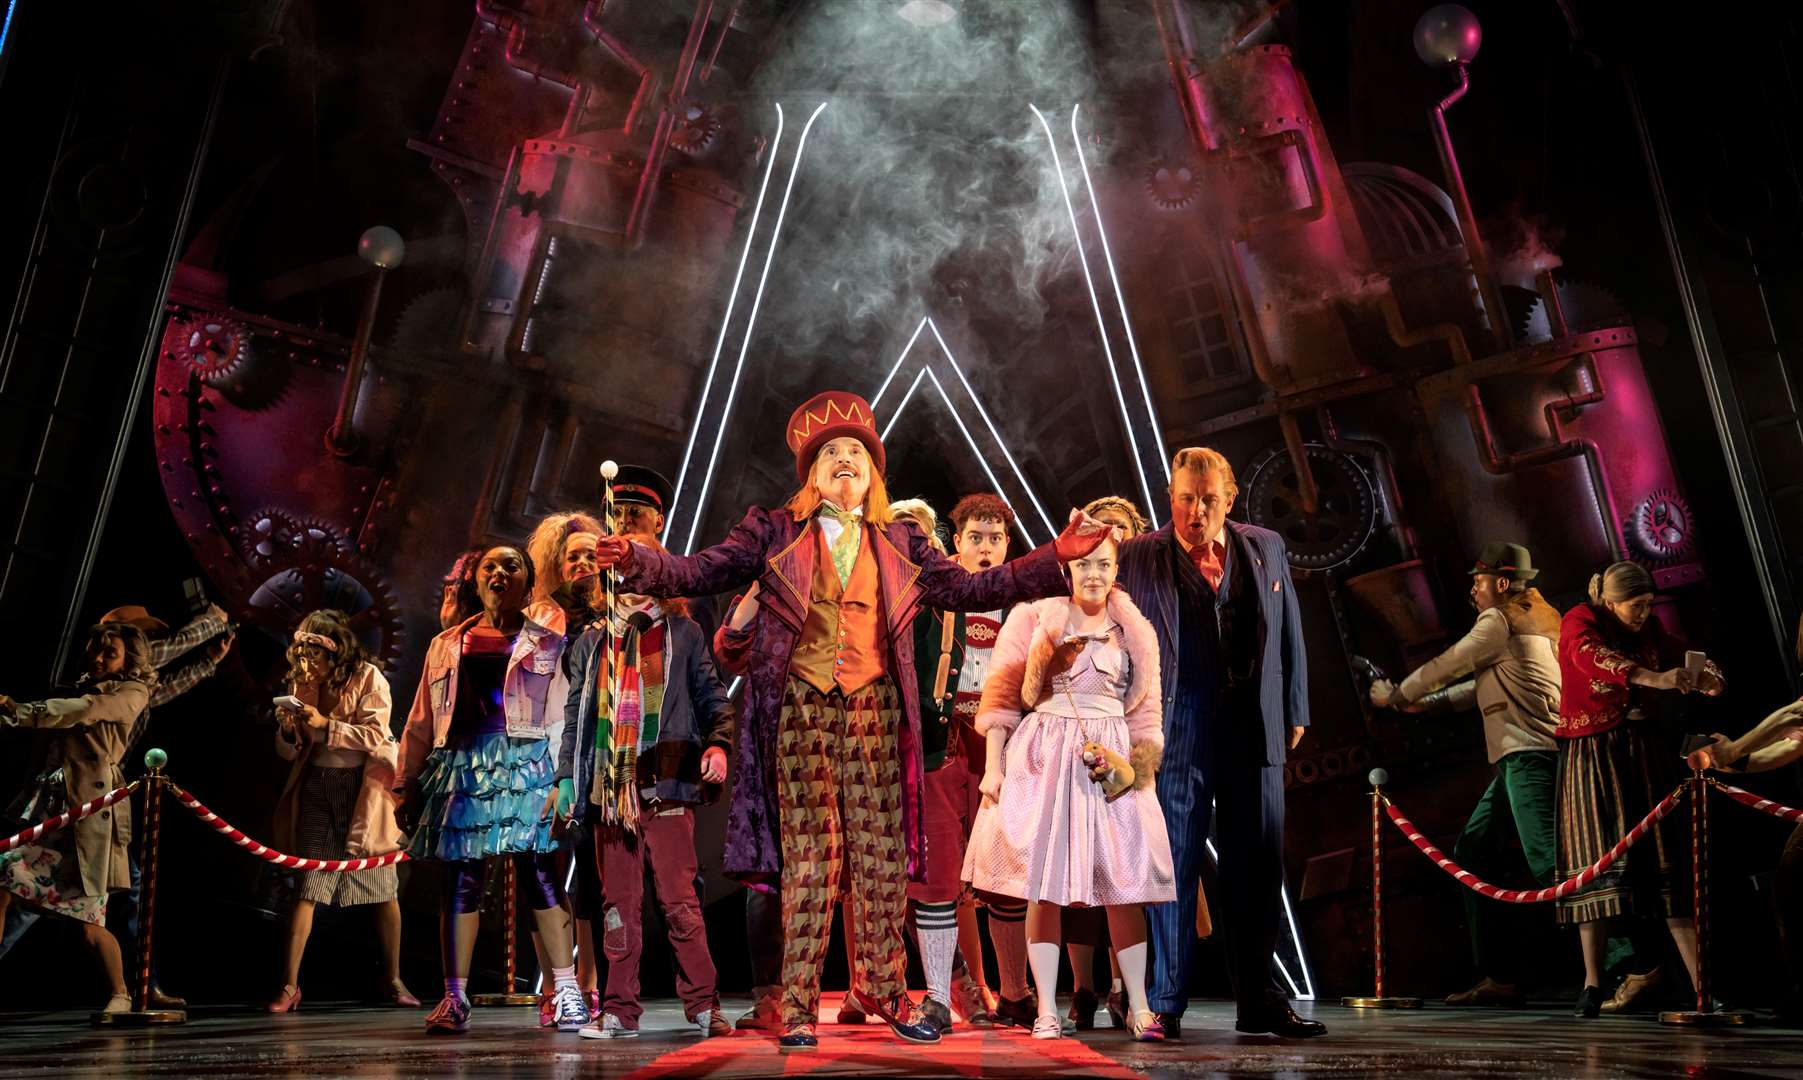 Charlie and the Chocolate Factory musical is coming to the Marlowe